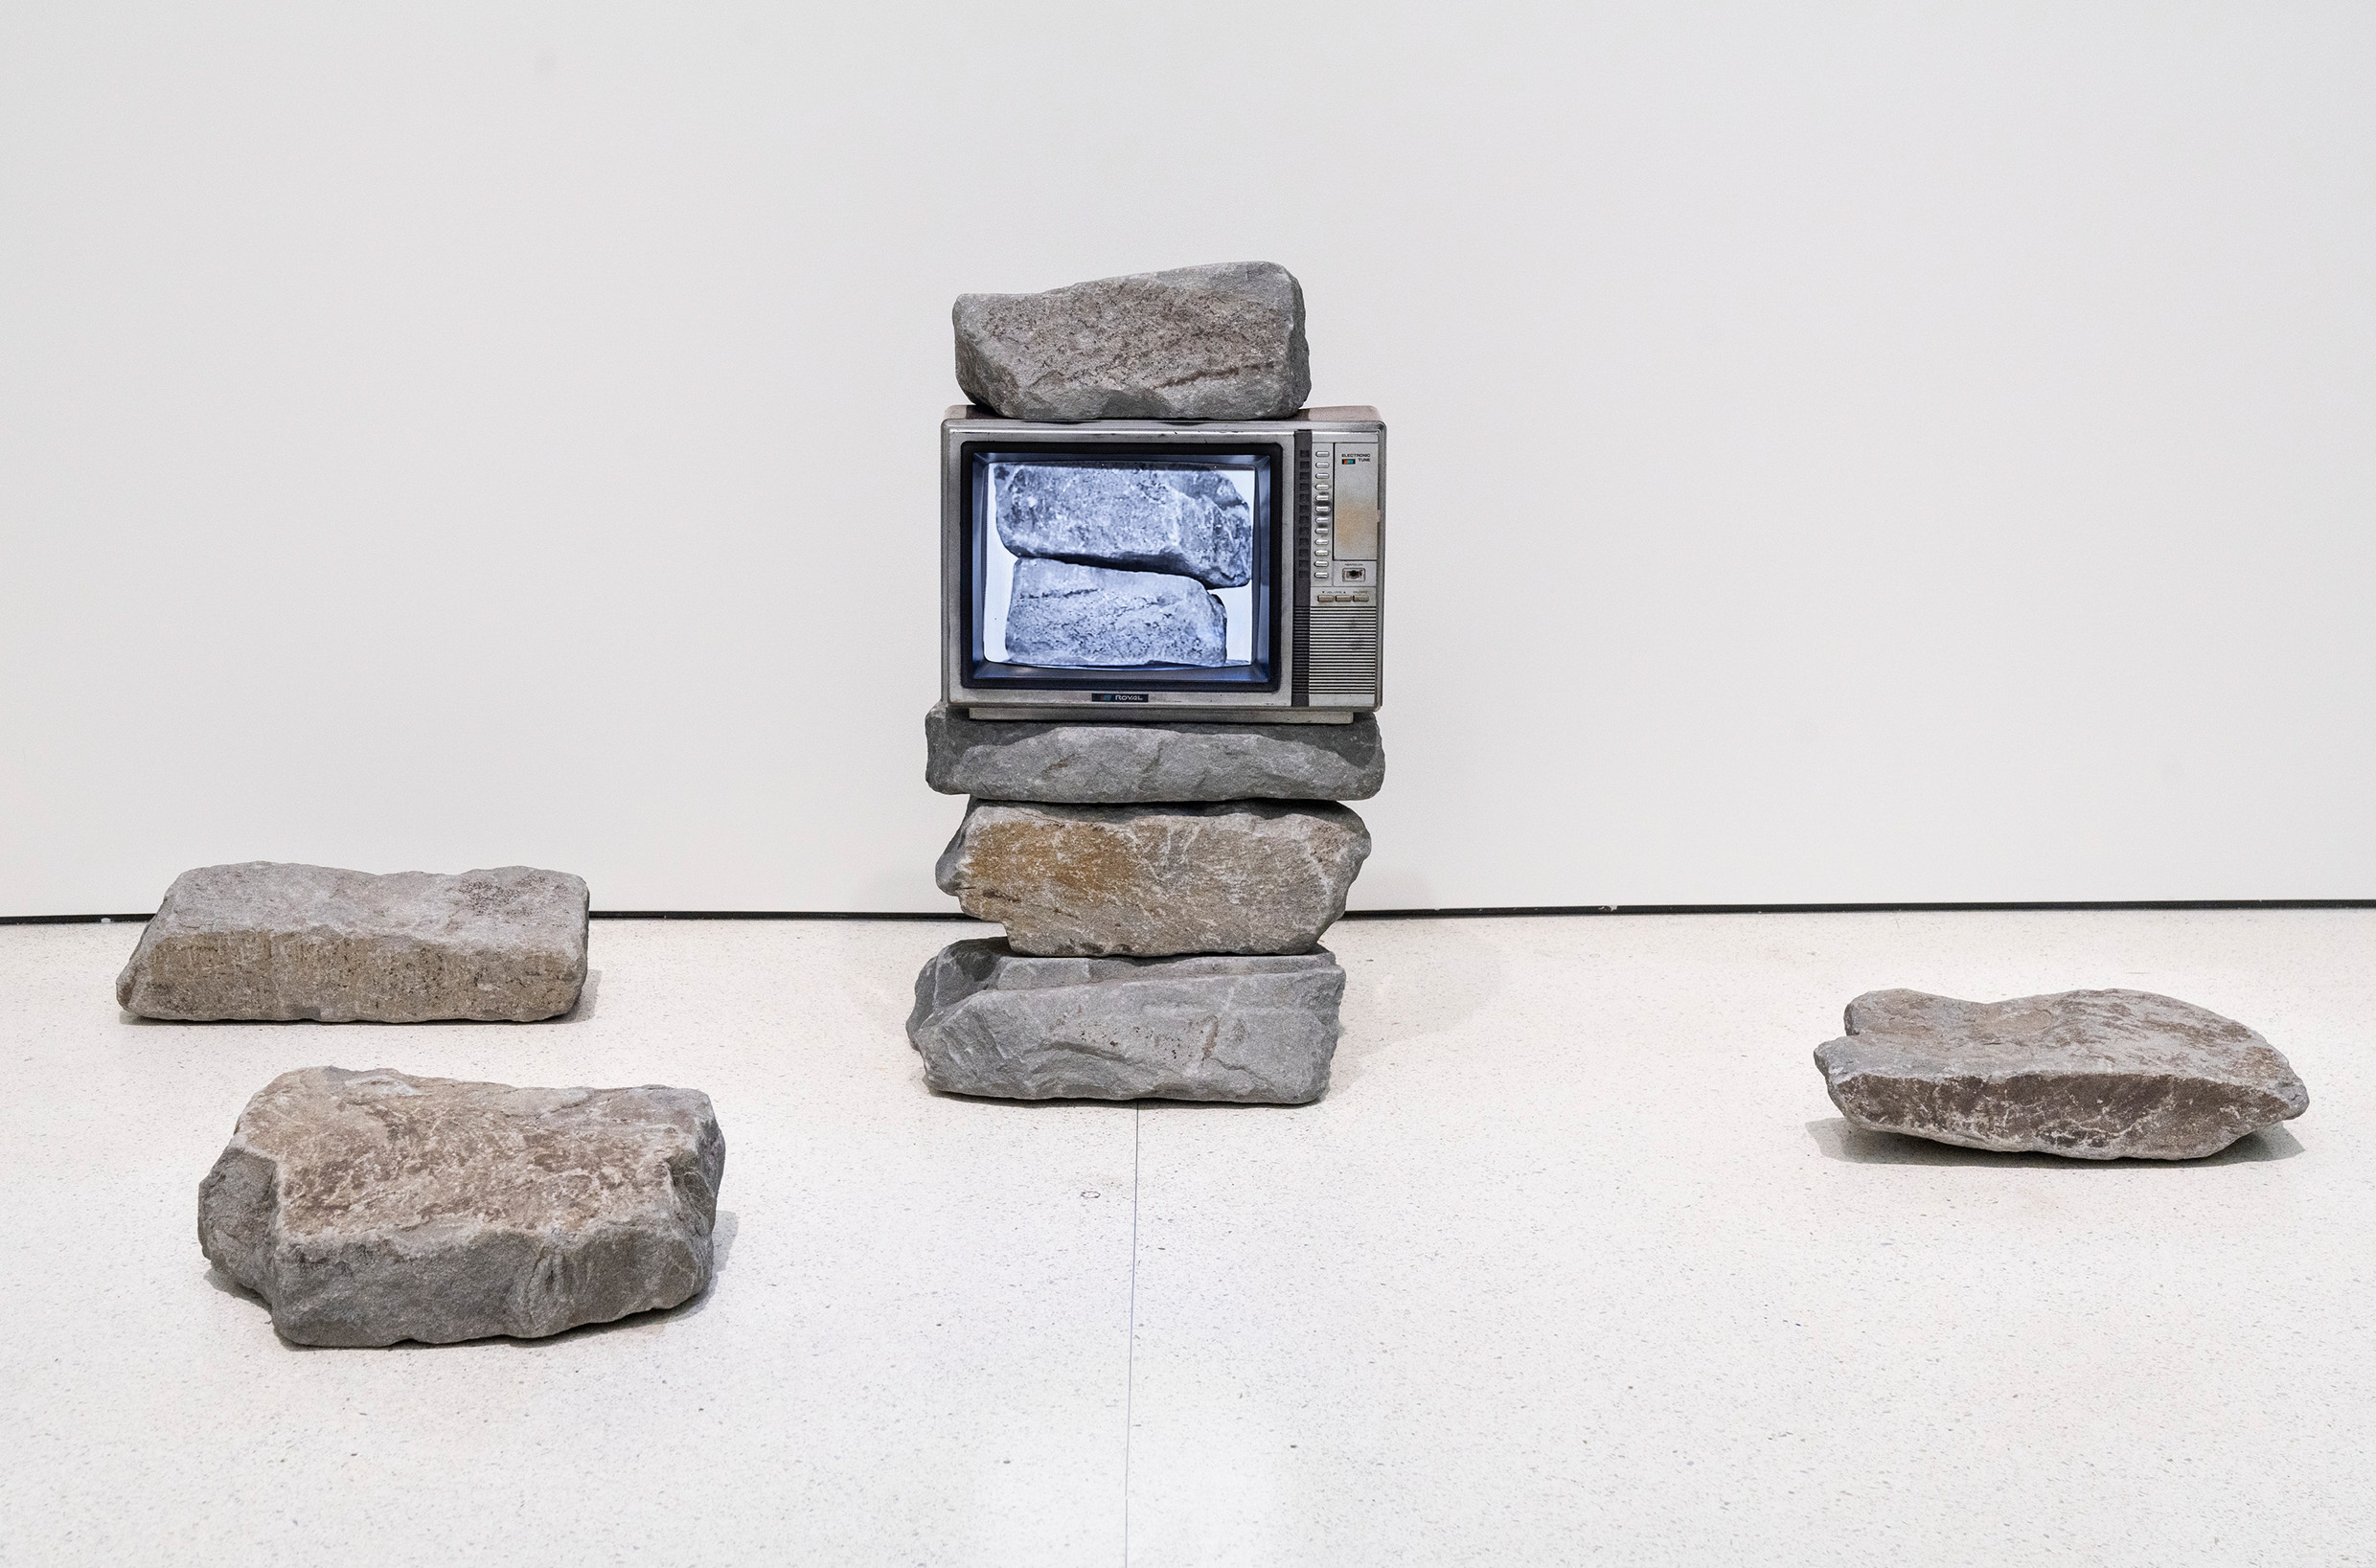 Sat atop three grey rocks on the floor of a gallery space, a small brown CRT television displays the image of two similarly stacked rocks on its screen. Another rock sits atop the TV, along with three more on the floor nearby.